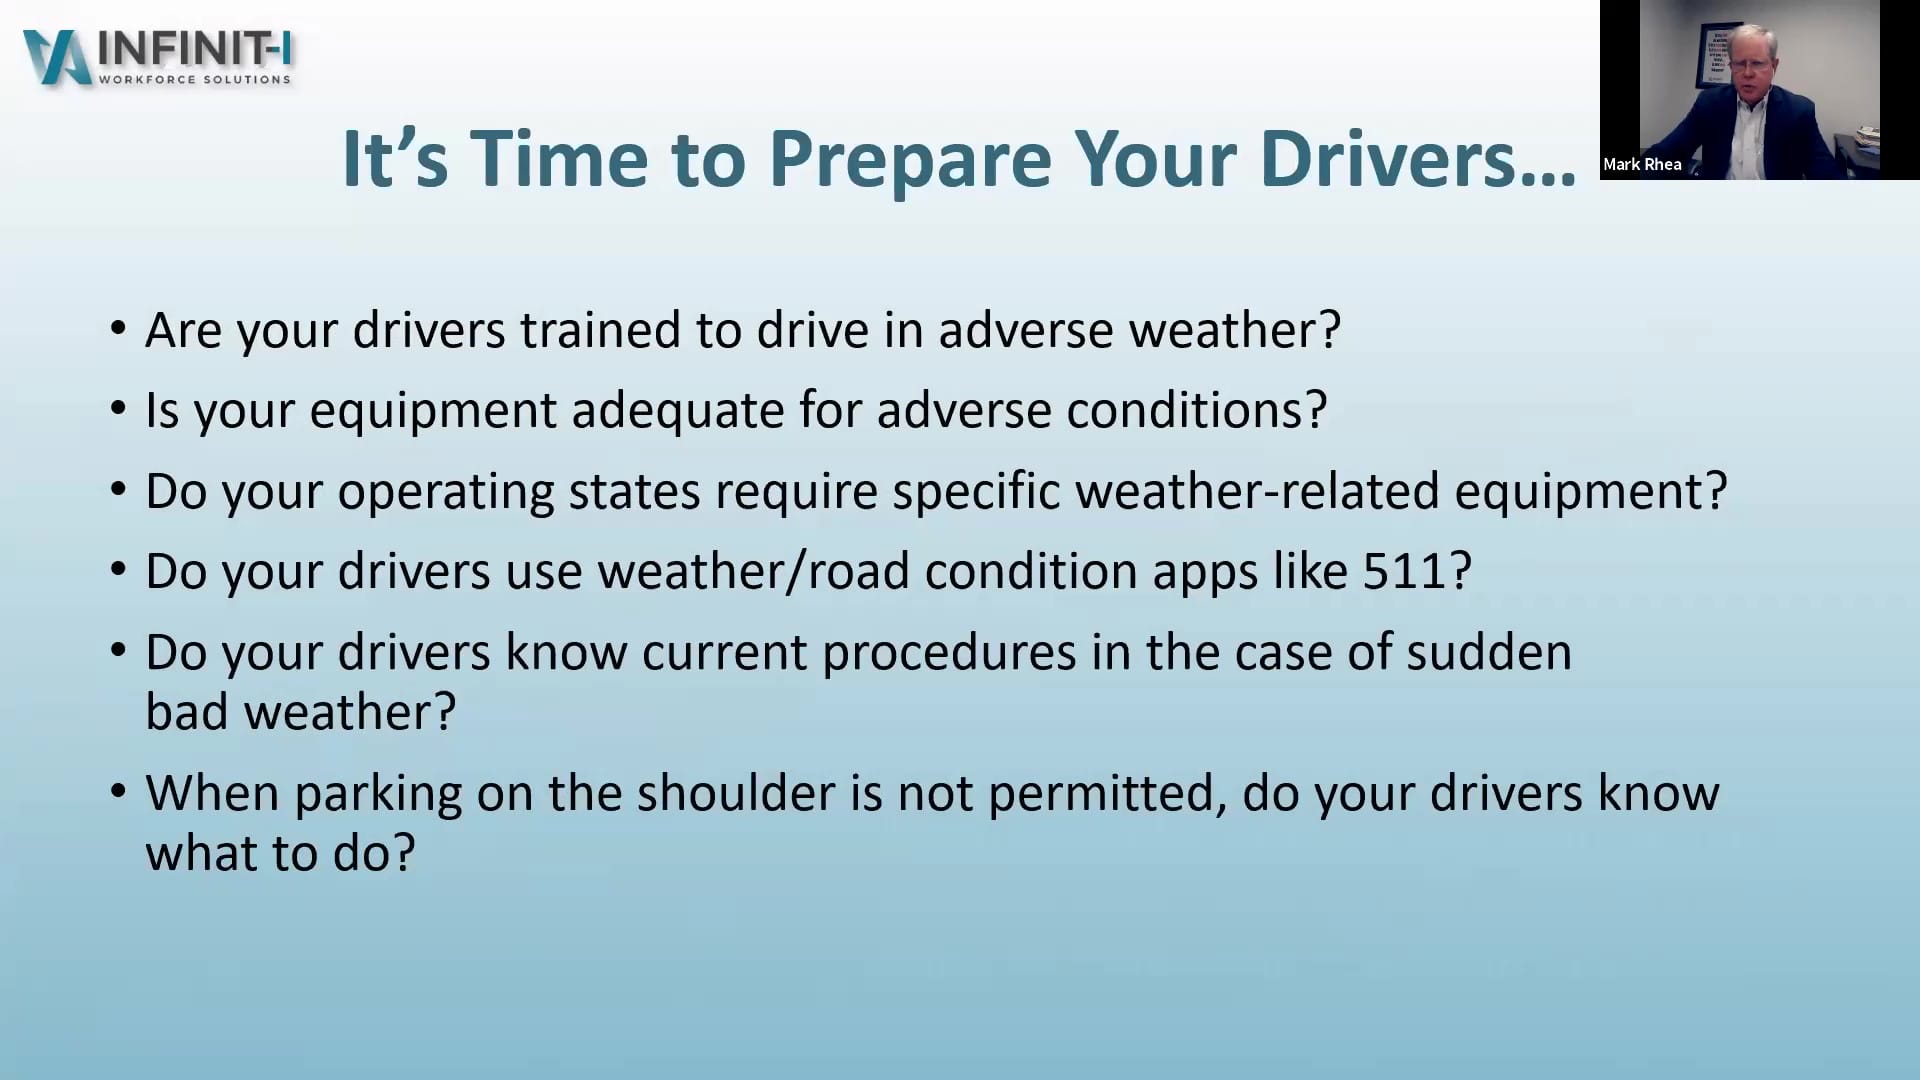 Fleet Preparedness for Adverse Weather Conditions Prepare Your Drivers